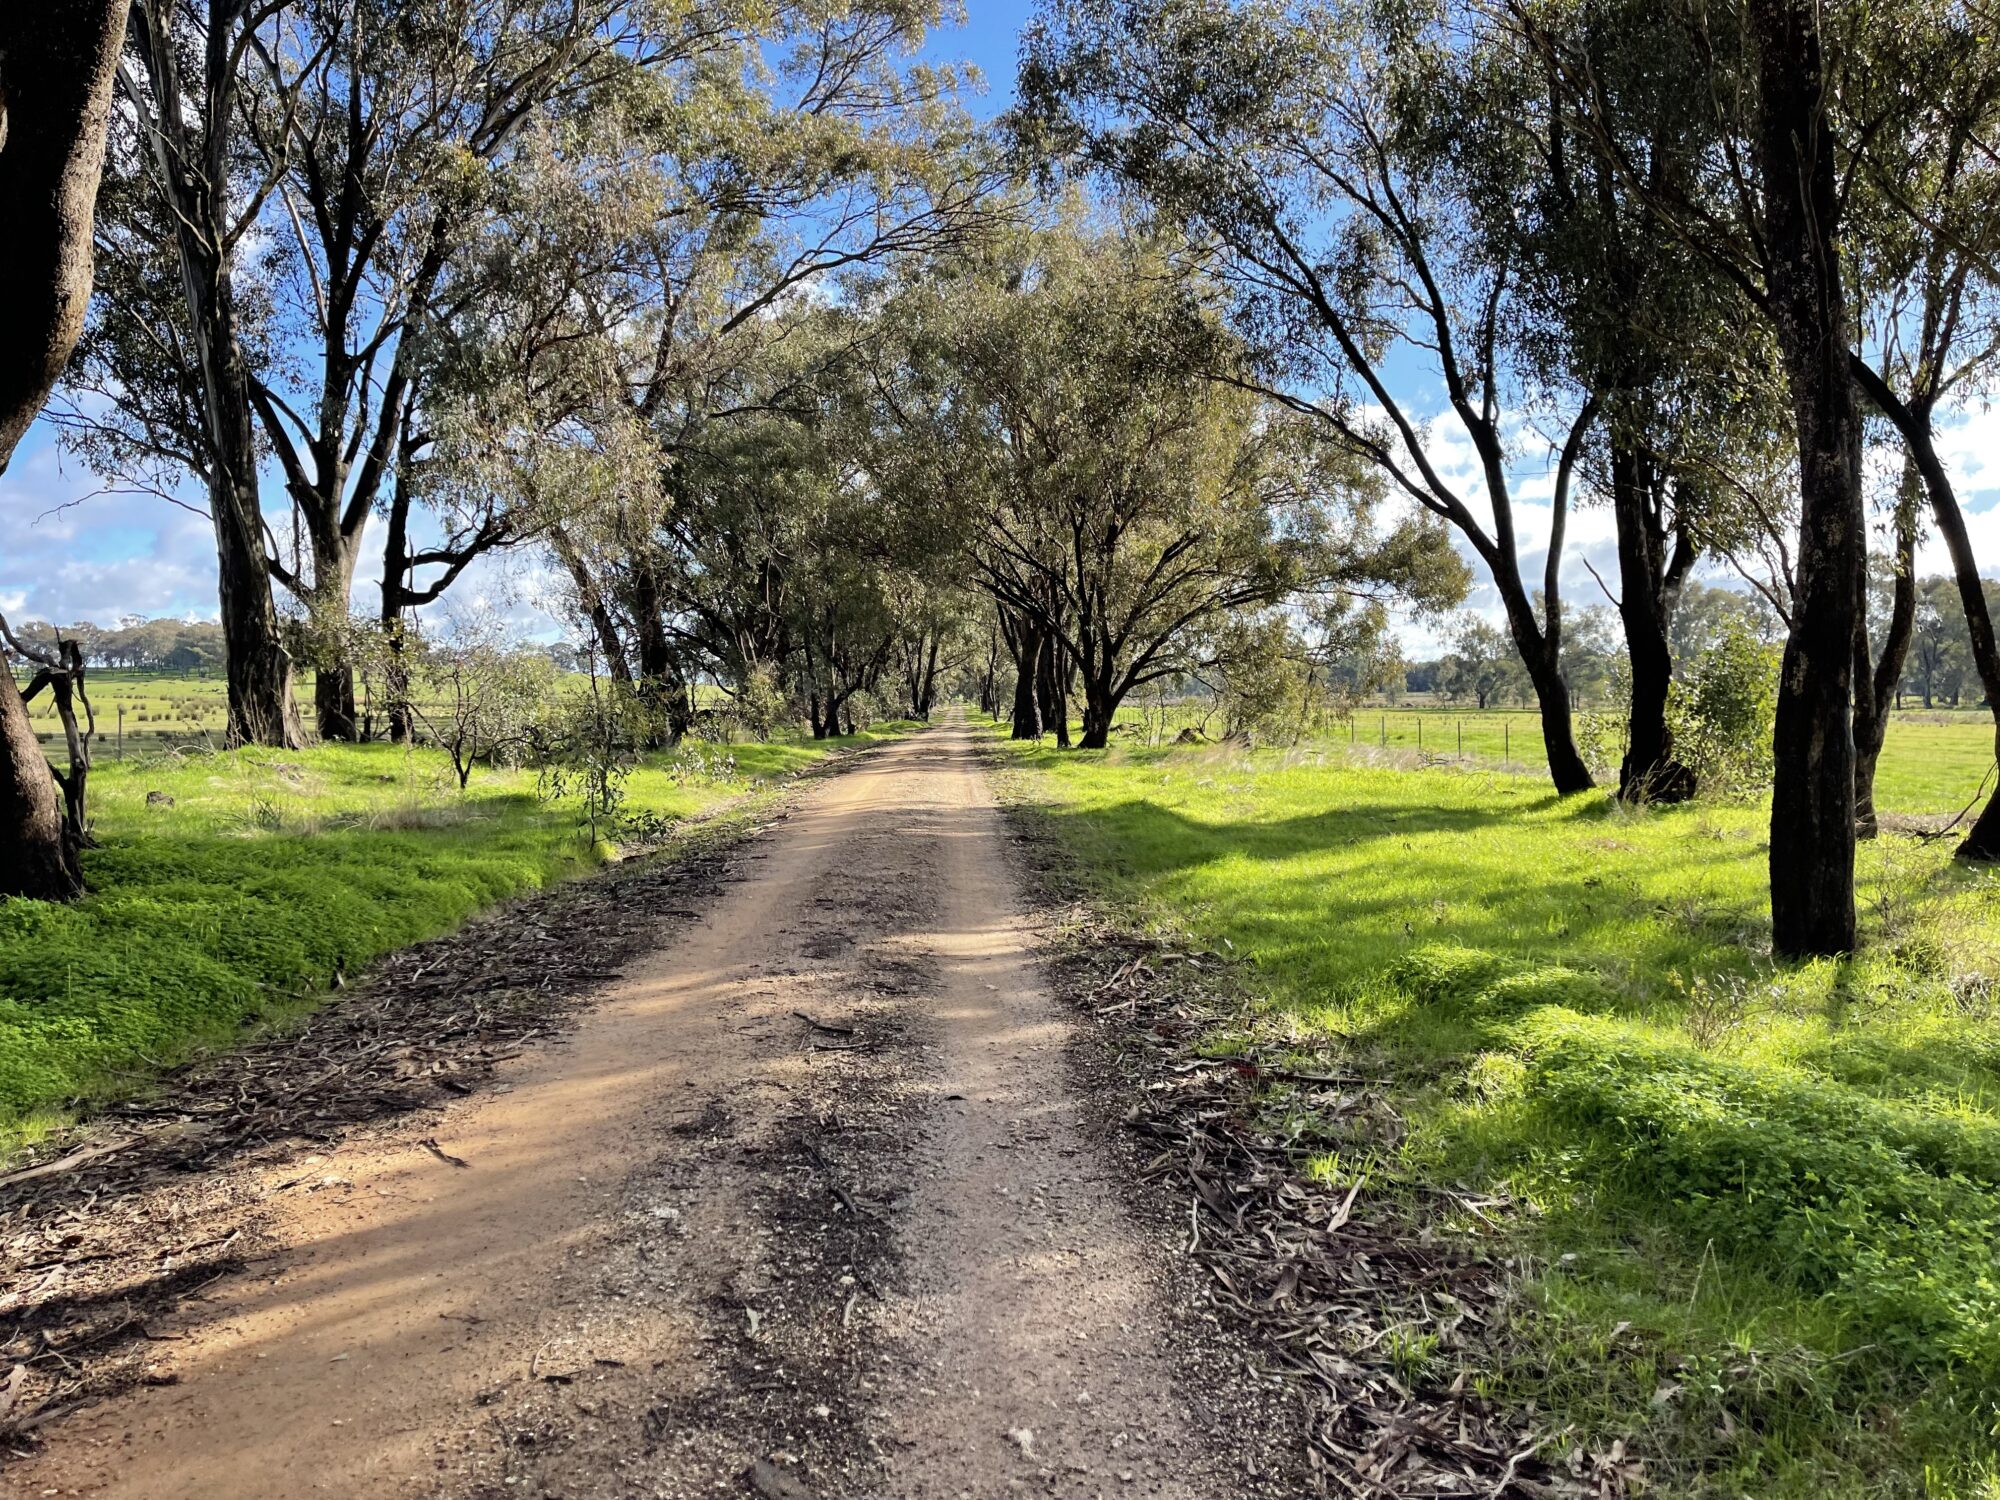 Weave through open farmland, historic sites and the Chiltern-Mt Pilot National Park on this picturesque point-to-point route.